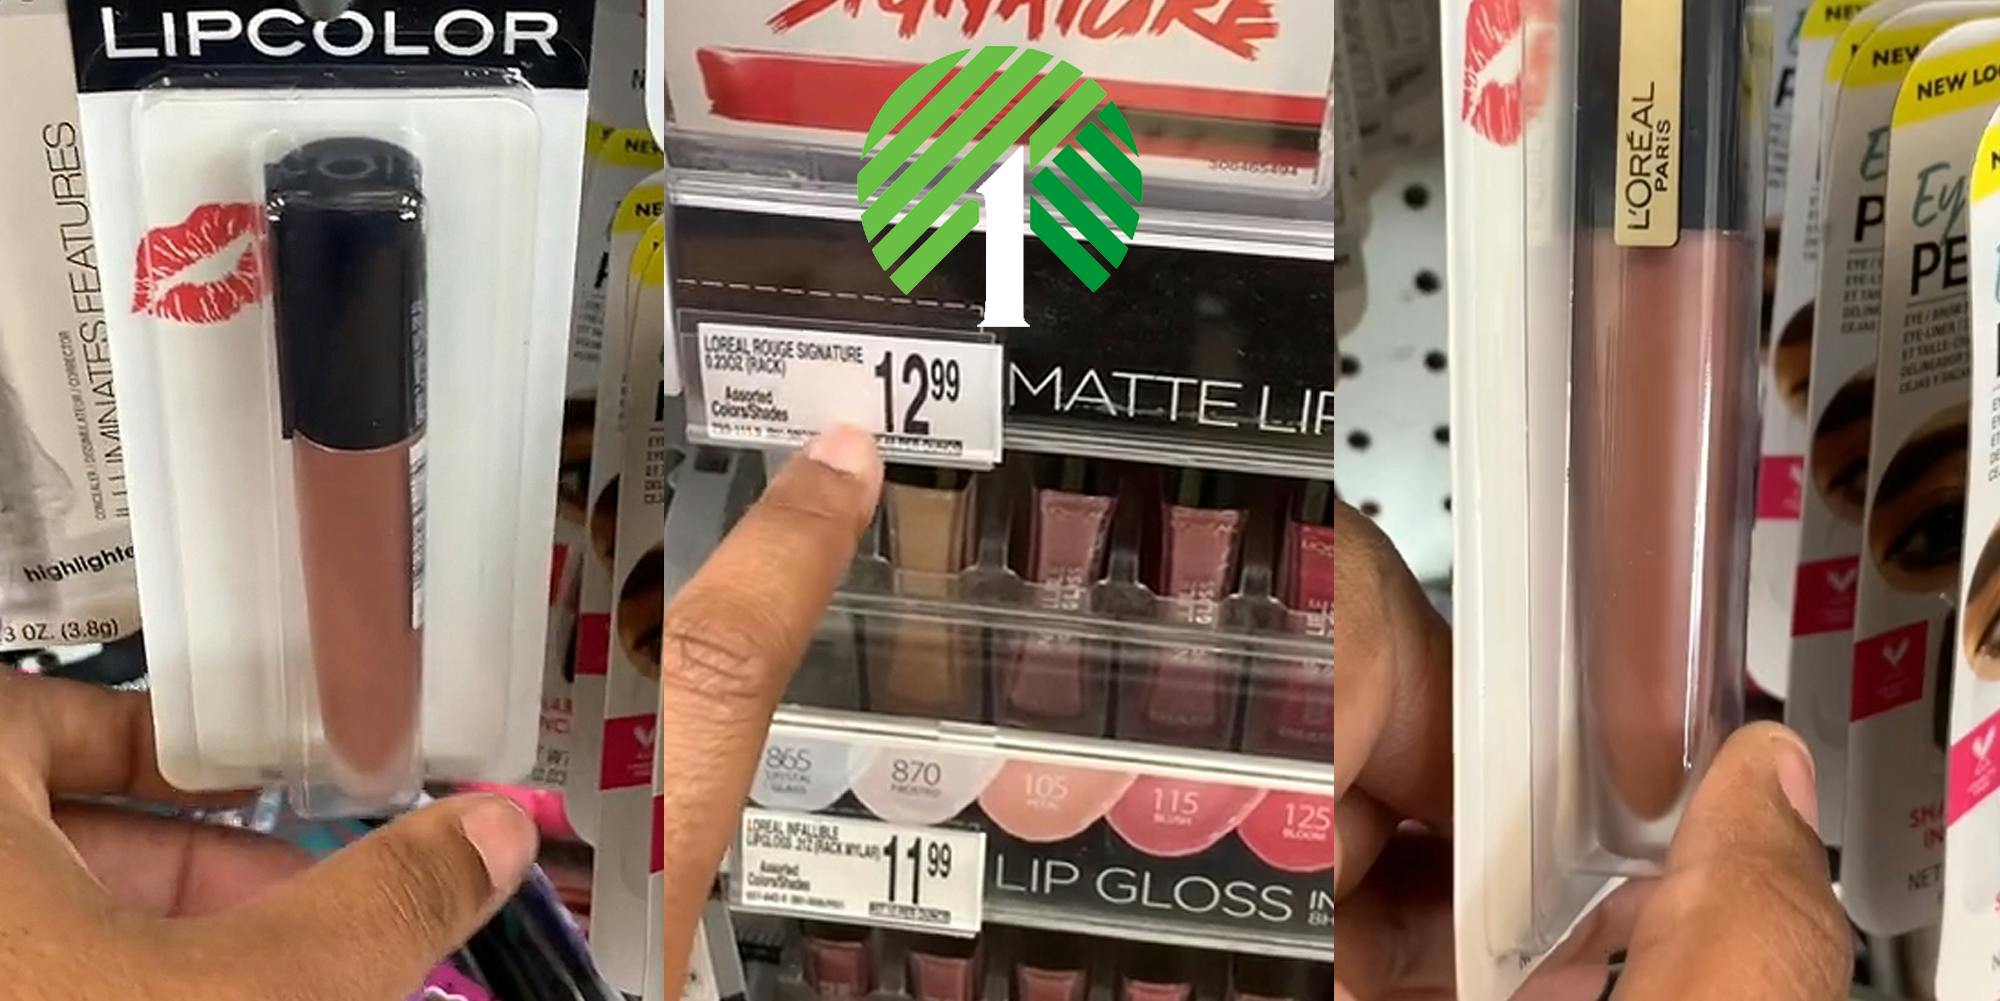 hand on Dollar Tree makeup (l) hand pointing to Loreal makeup with "12.99" price tag with the Dollar Tree logo centered above (c) hand turning Dollar Tree makeup to reveal Loreal logo (r)